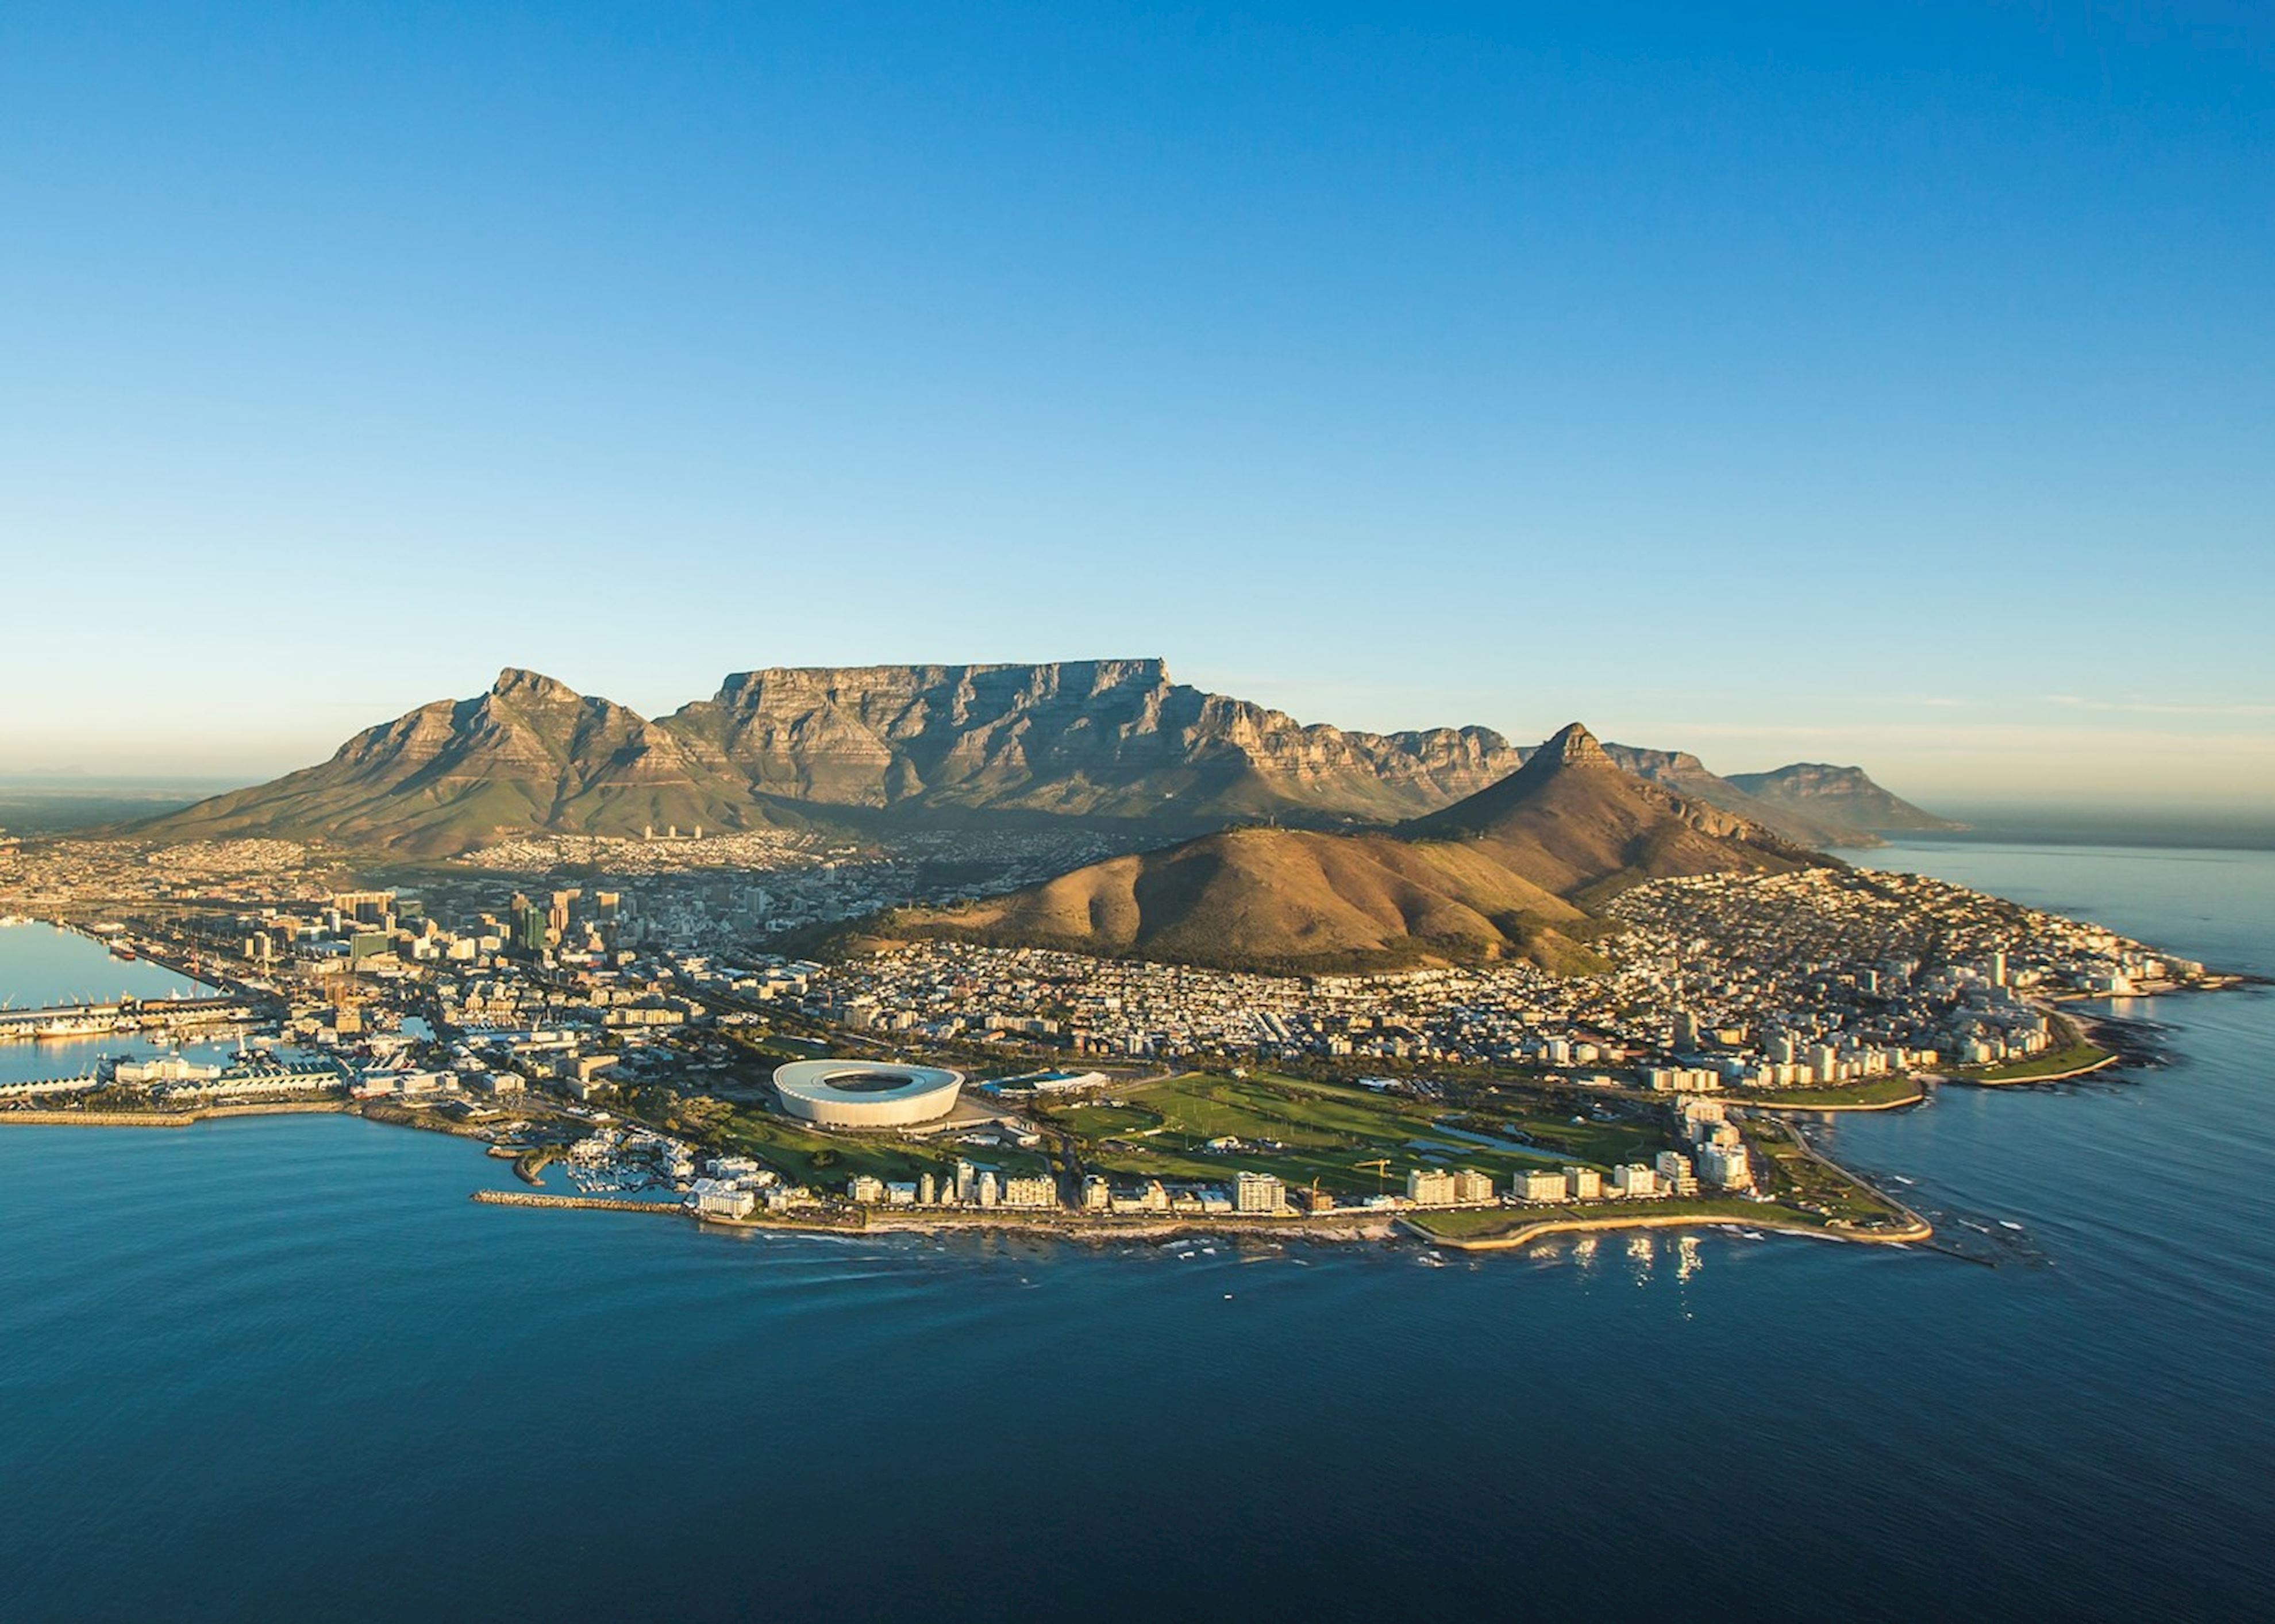 visit-cape-town-south-africa-tailor-made-vacations-audley-travel-ca